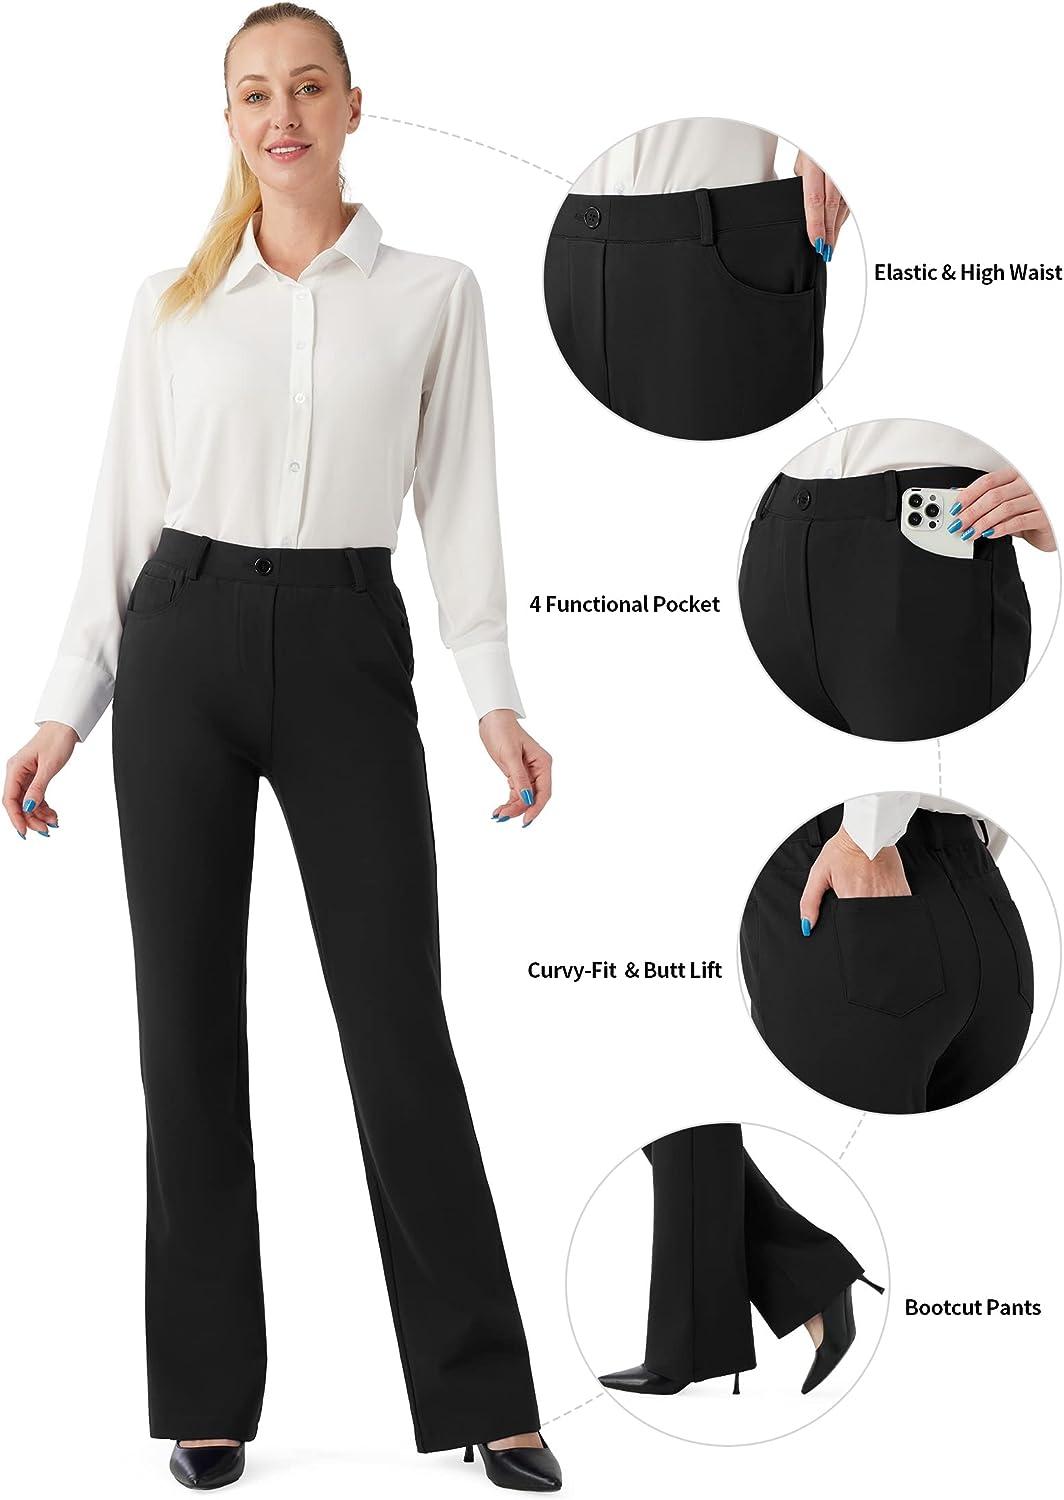 Women's Stretchy Bootcut Dress Pants Office Work Business Casual Slacks  with Pockets 30/32 Inseam 30 inseam (Regular) 14 Black